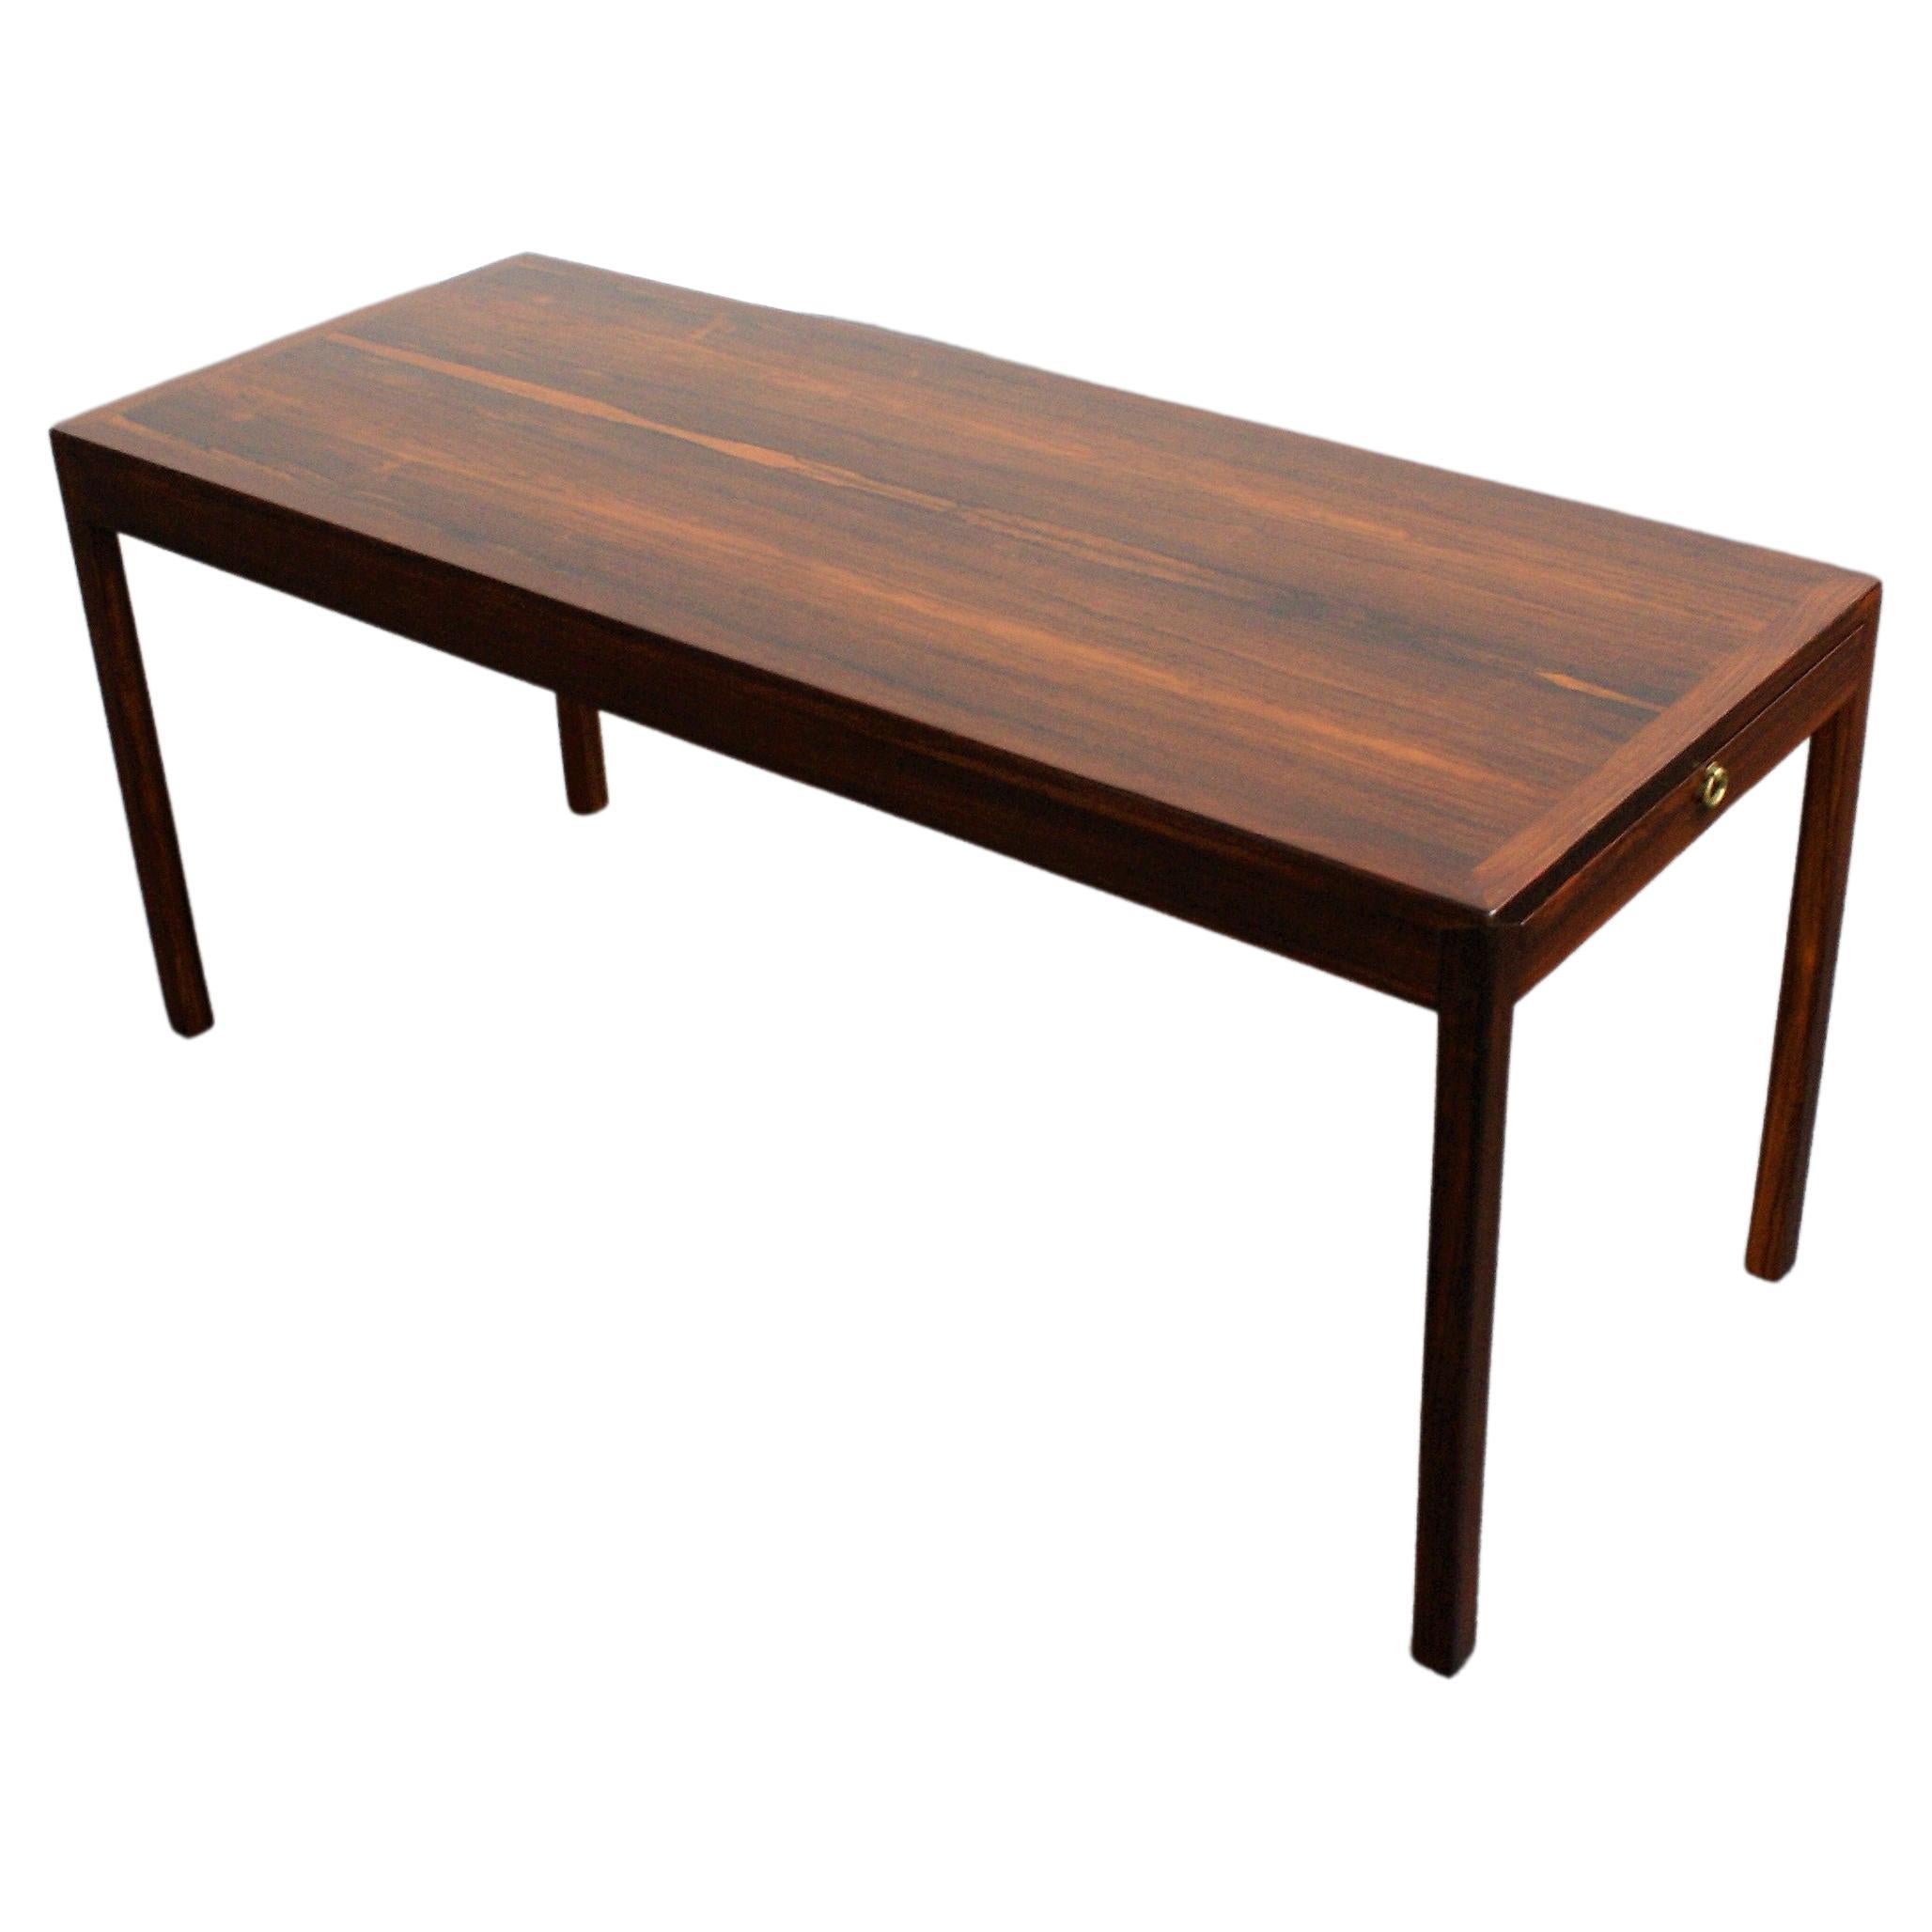 Ole Wanscher Extendable Low Table in Brazilian Rosewood for A. J. Iversen, 1950s For Sale